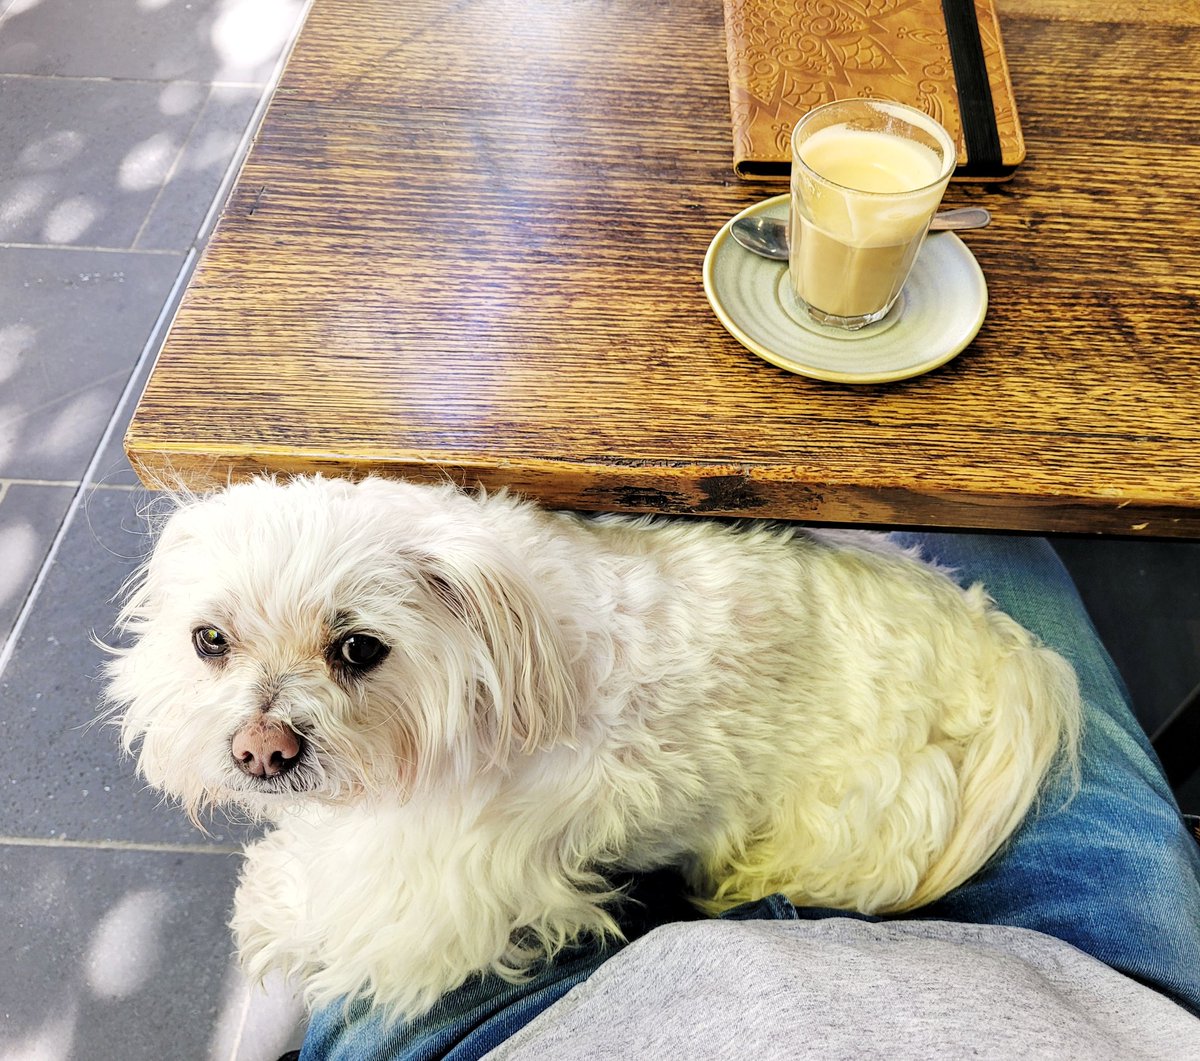 Tao's keeping my lap warm on a brisk 13° Melbourne morning #MeAndMyTao #Maltese #CafeLife #DogsLife #CuteDogs #DogsofMelbourne #DogsofTwittter